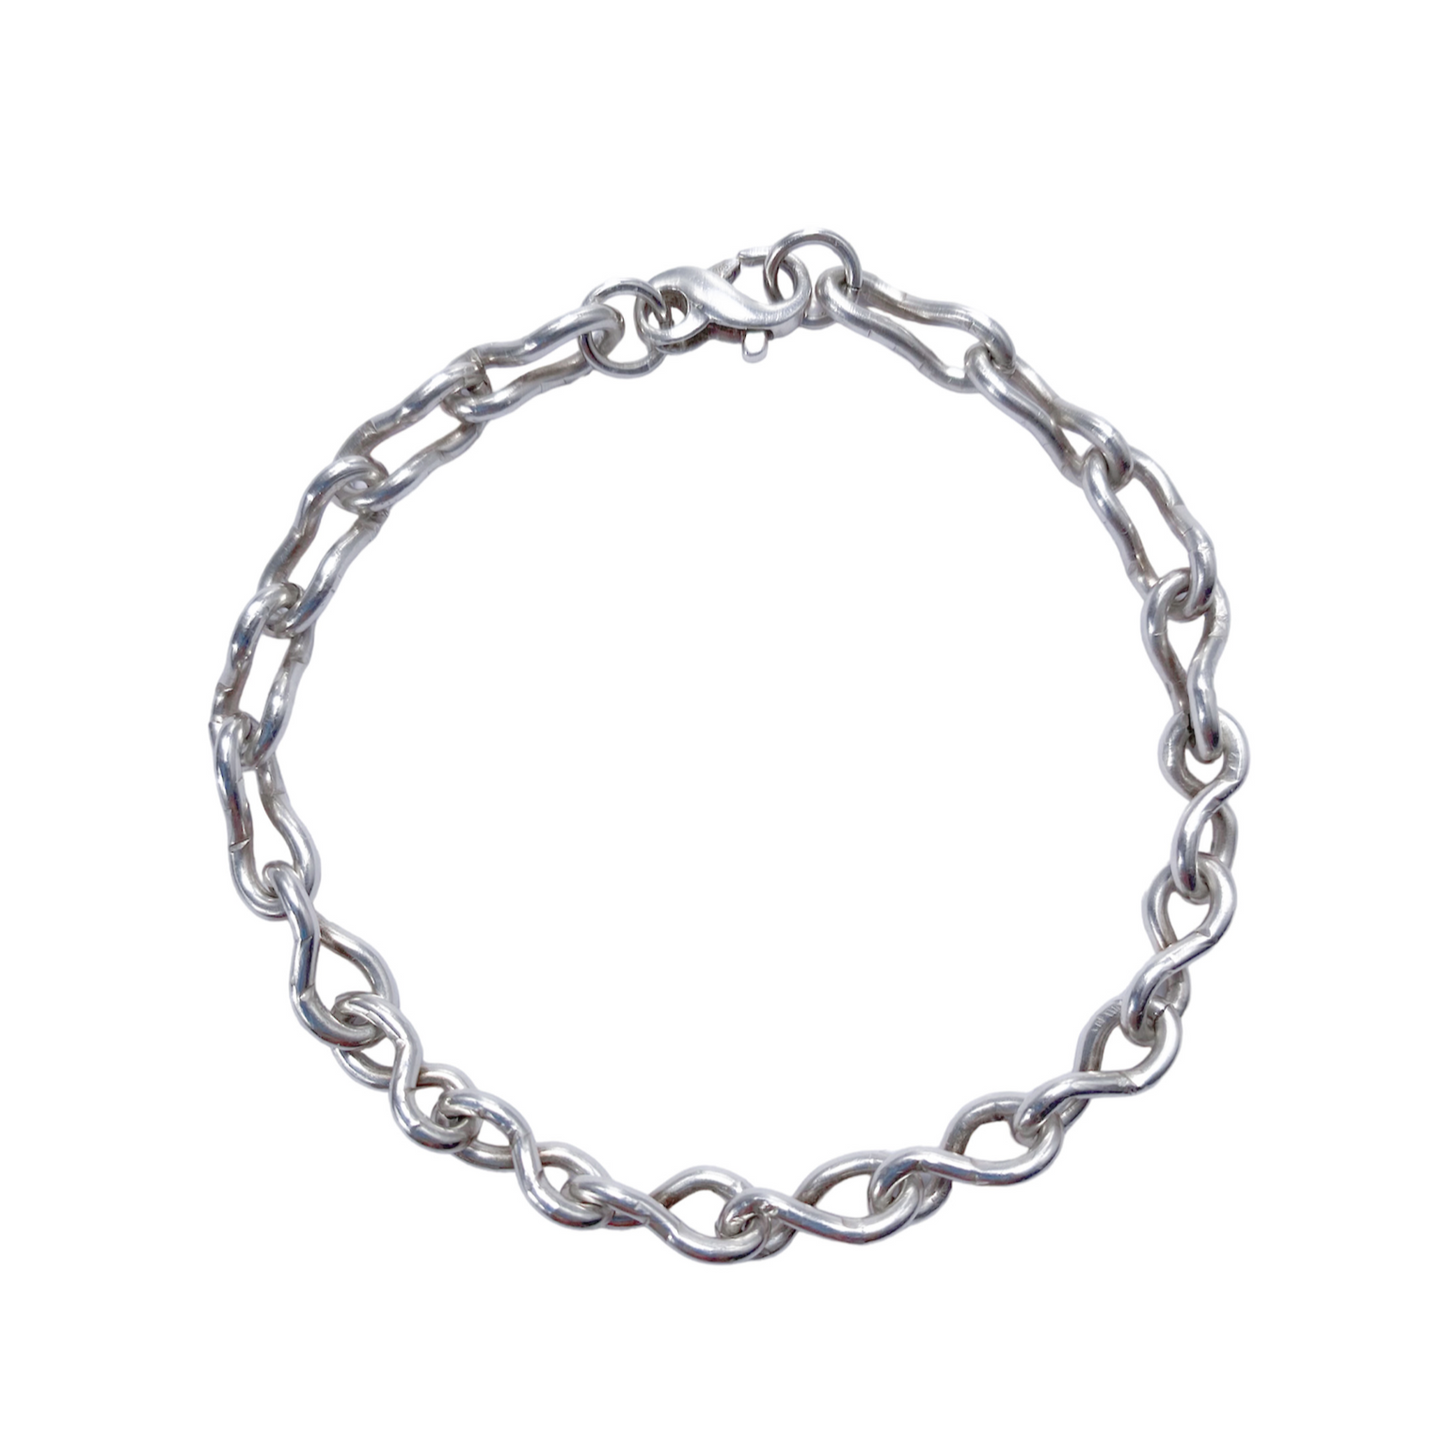 Tartarus Recycled Sterling Silver Bracelet - embracing imperfection, echoing ancient stories - £145 - Hanifah Jewellery